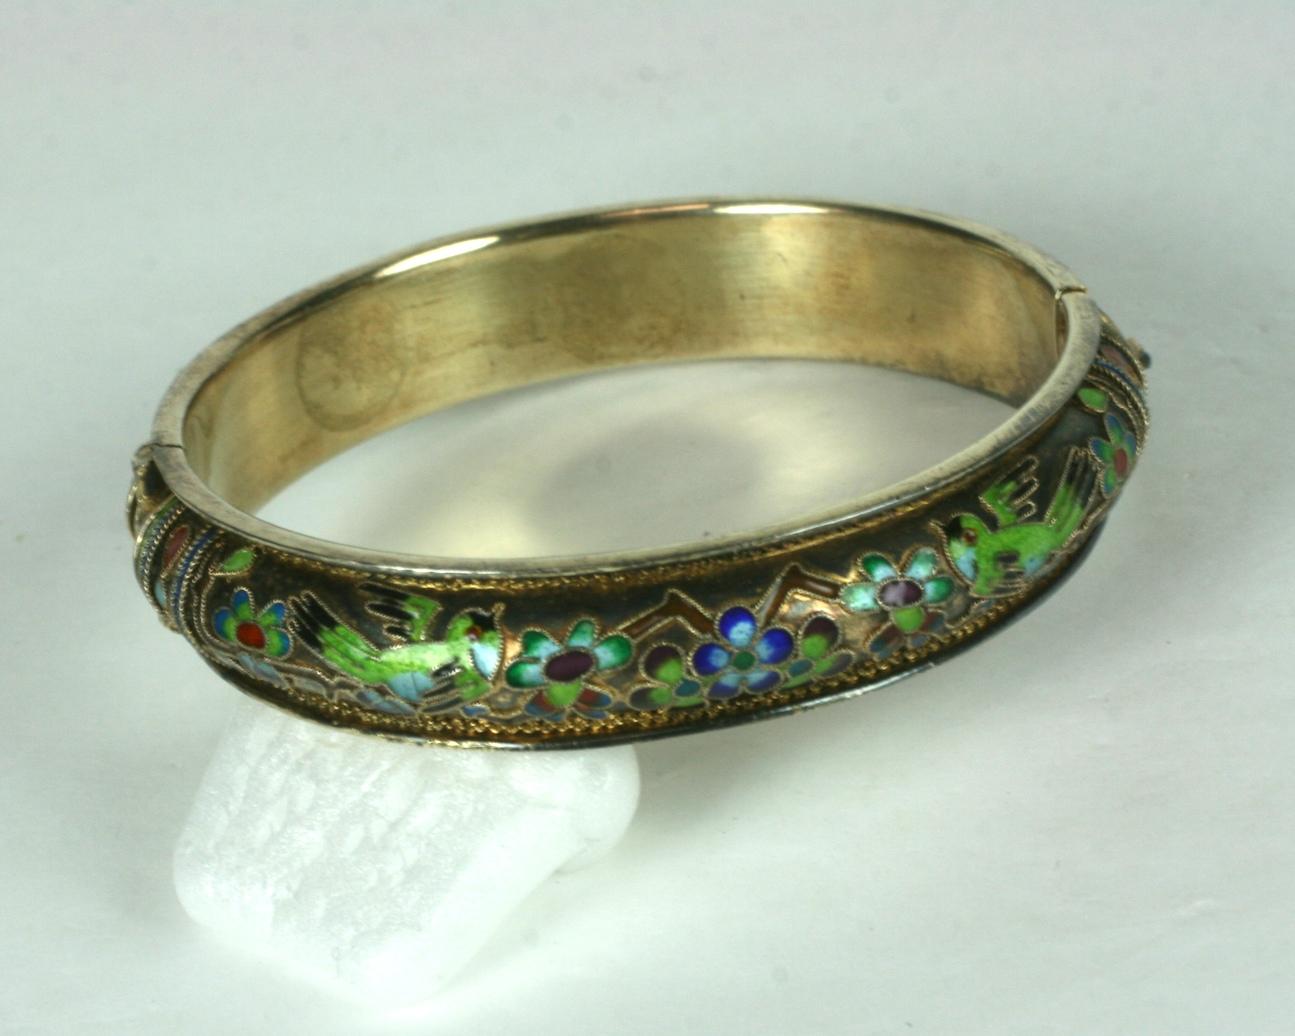 Chinese Cloisonne Enamel Bangle on silver vermeil base. Elaborate enameled designs with birds in flight within flowers. Side hinge opening. 
2.25 interior diameter opening. .5